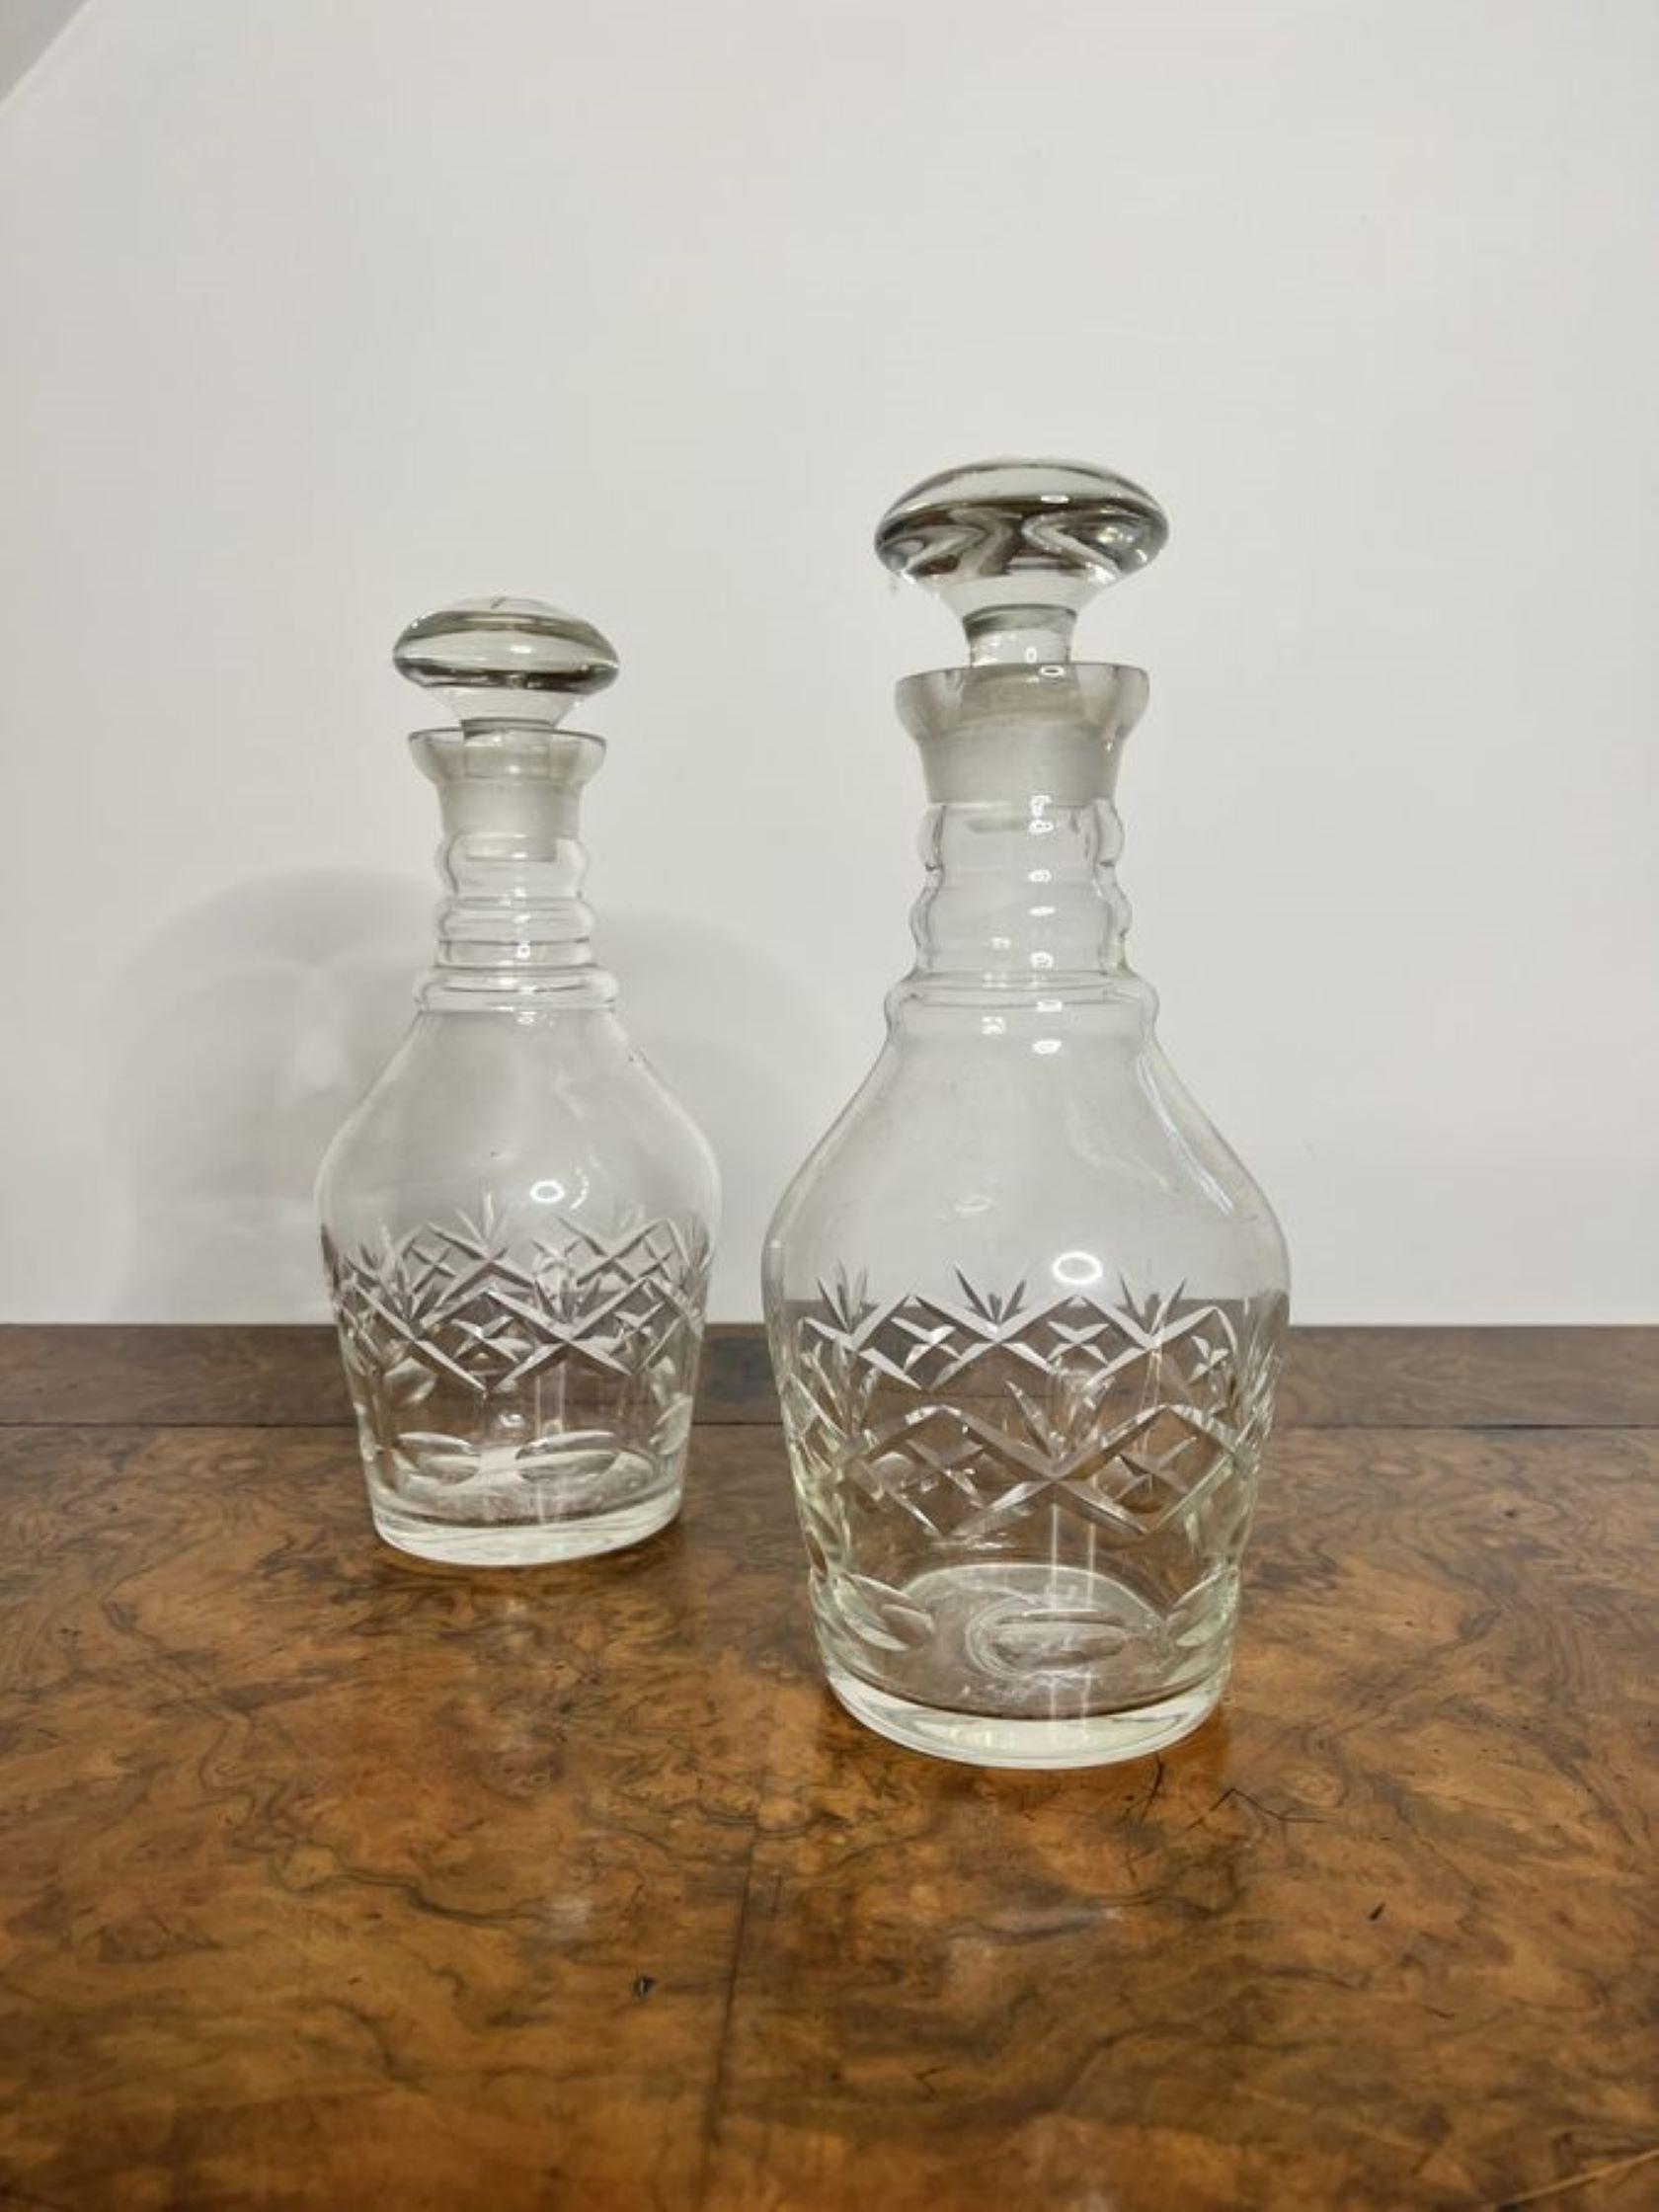 Wonderful pair of antique Victorian cut glass decanters having a pair of Victorian decanters with wonderful cut glass detail with the original cut glass stoppers.

D. 1880